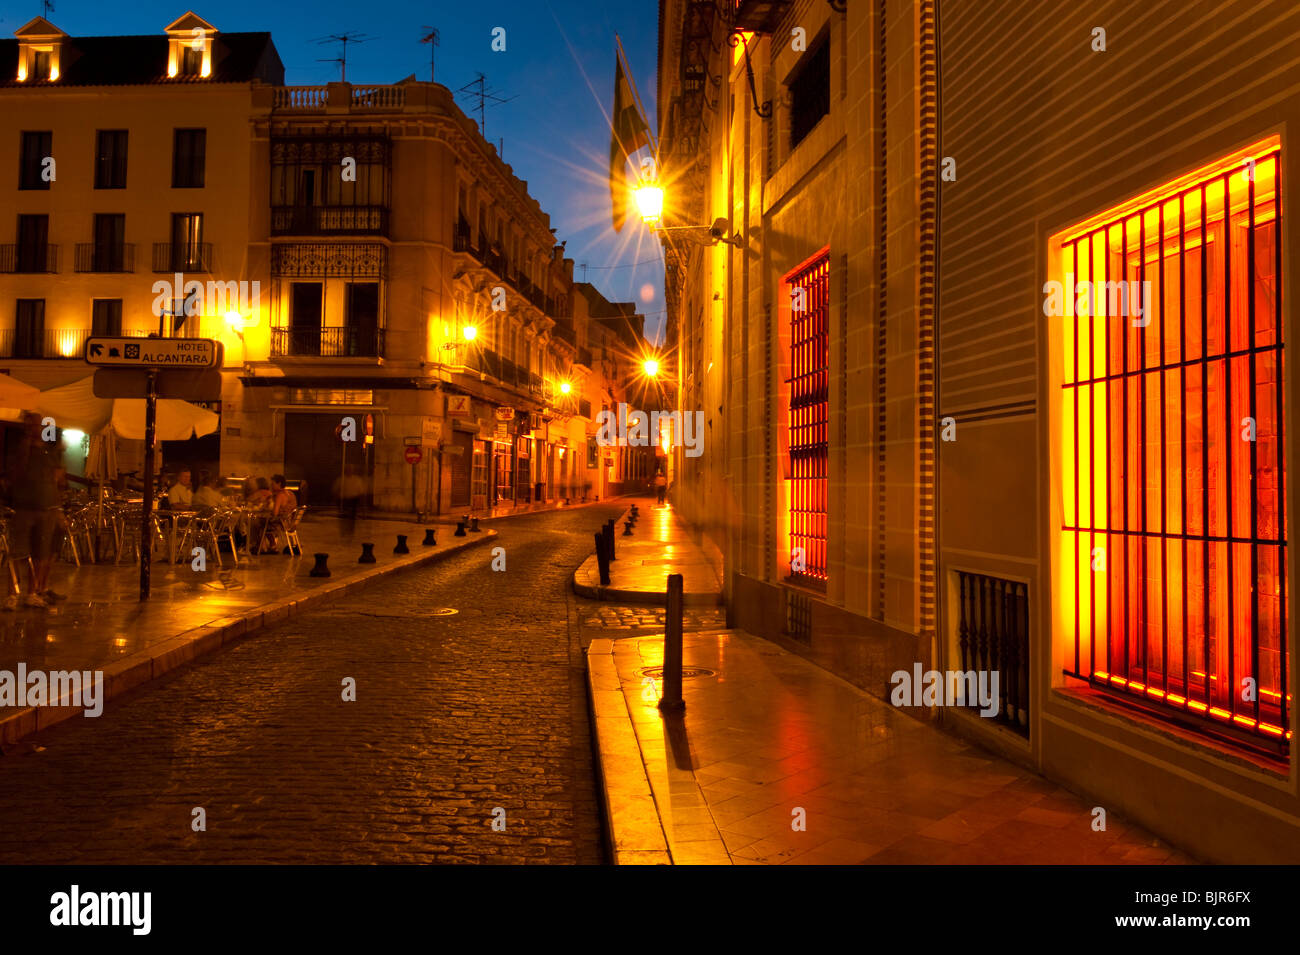 This is an image of a street at dusk in Seville, Spain. Stock Photo